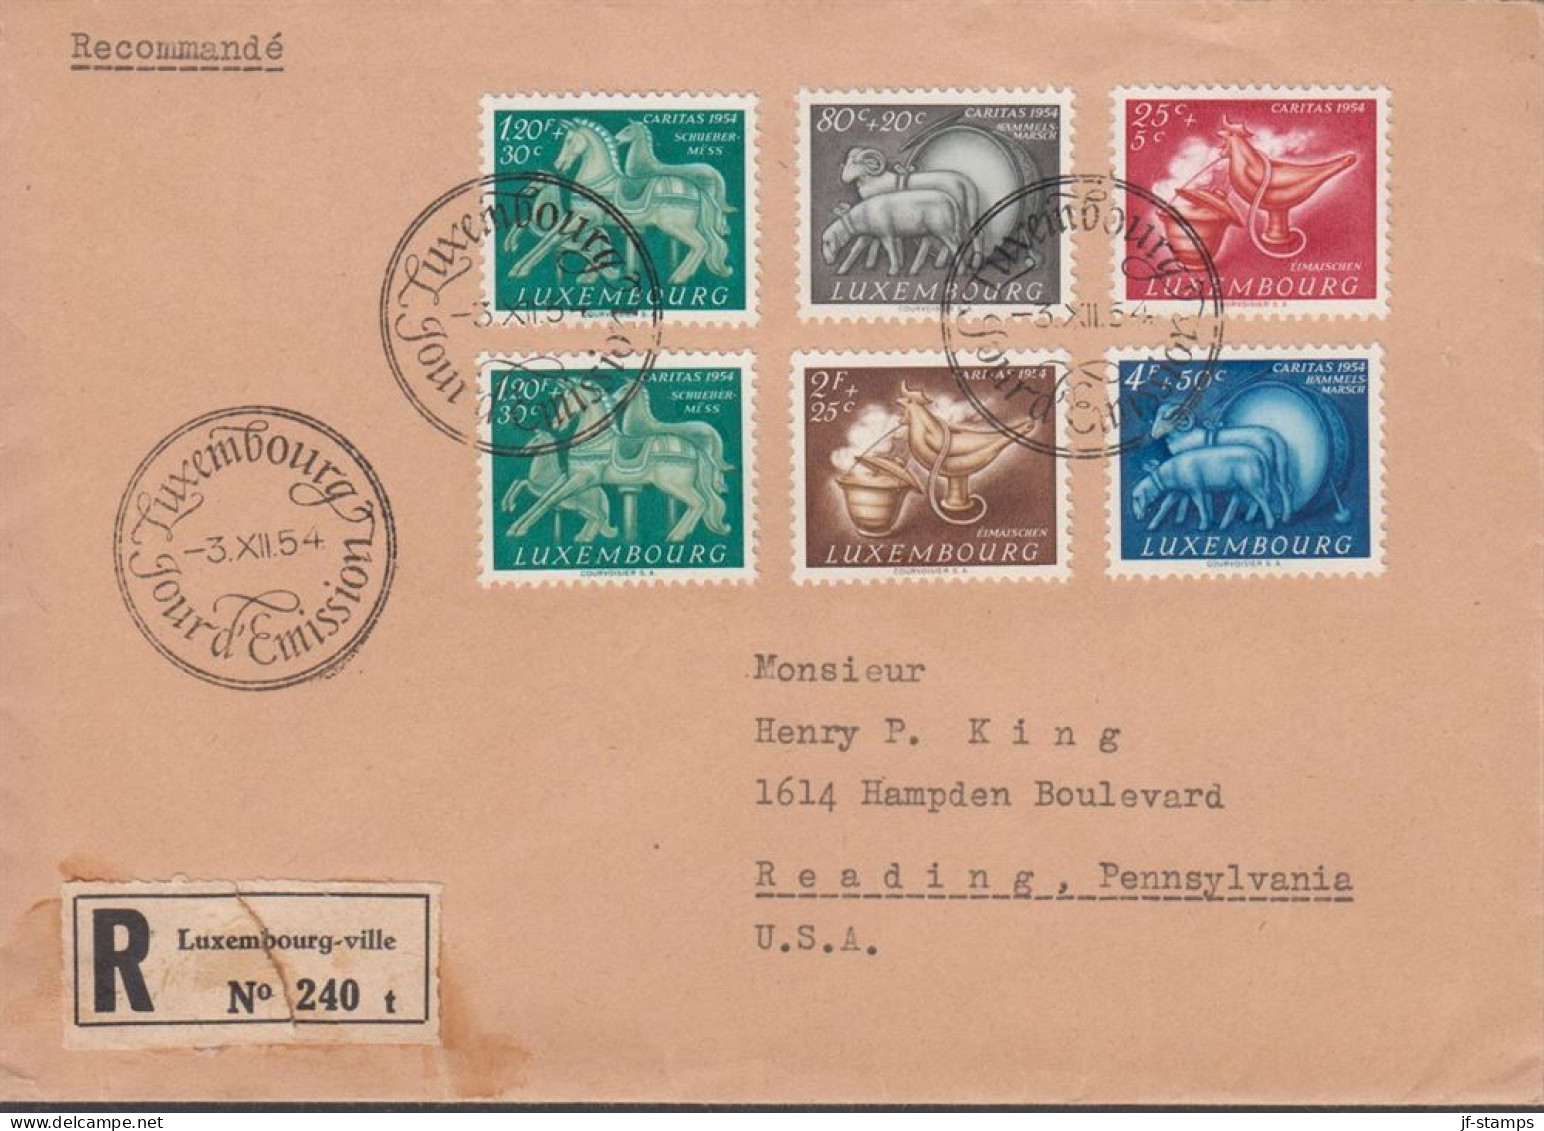 1954. LUXEMBOURG. Fine Registered FDC To USA With Complete Set CARITAS Cancelled First Da... (Michel 525-530) - JF445150 - Briefe U. Dokumente